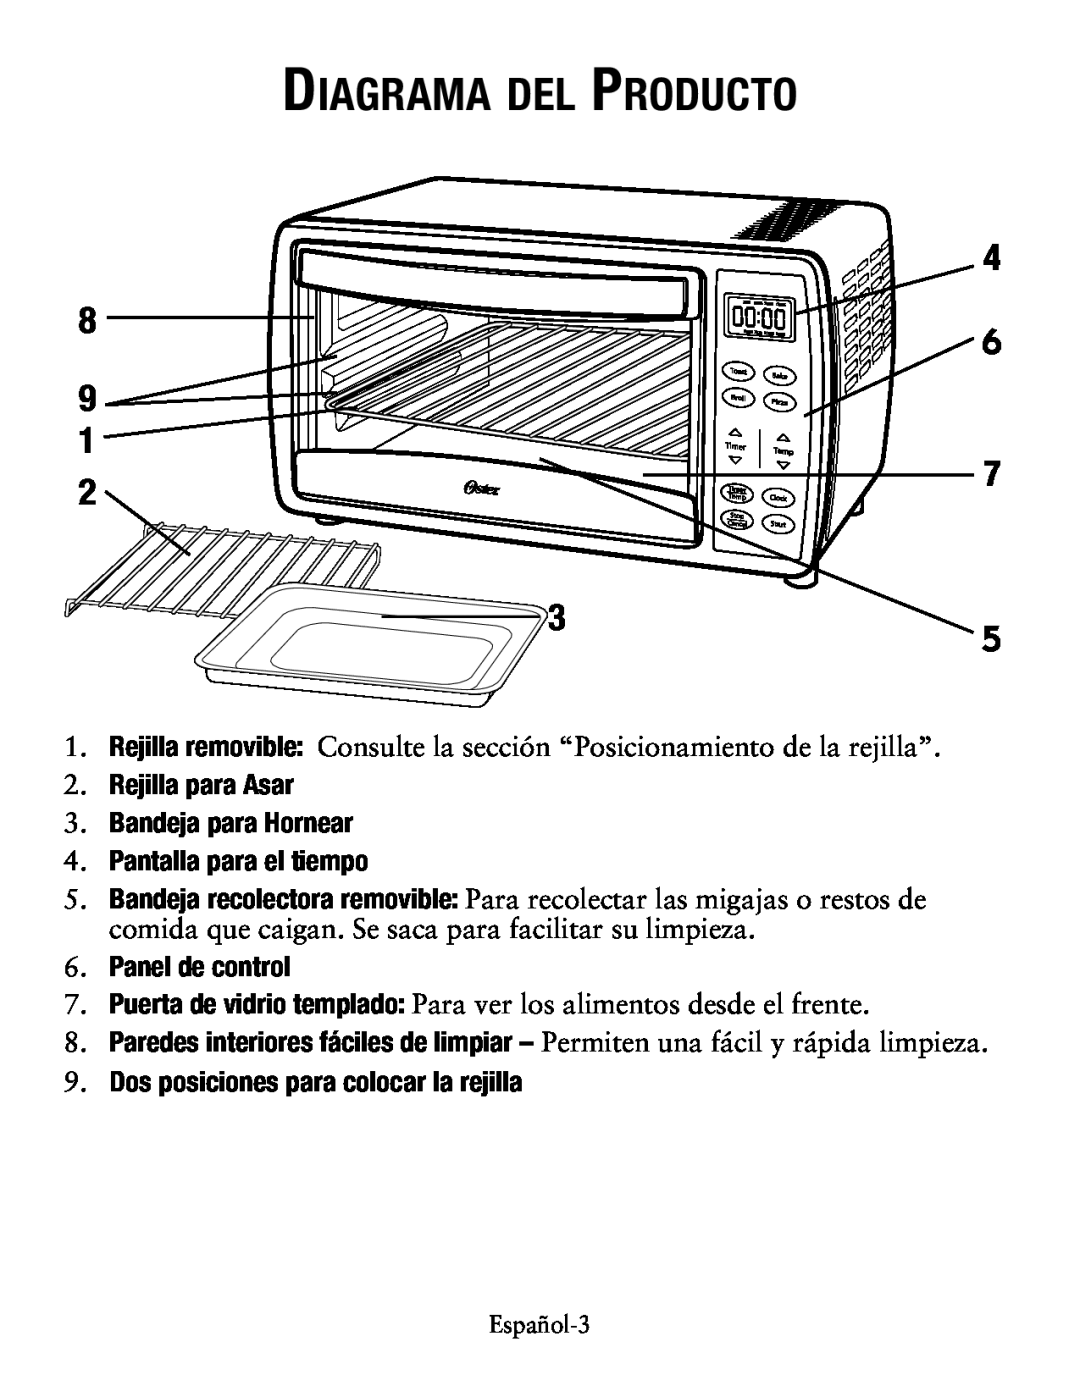 Oster TSSTTVDGSM, Small Digital Oven user manual Diagrama del Producto 